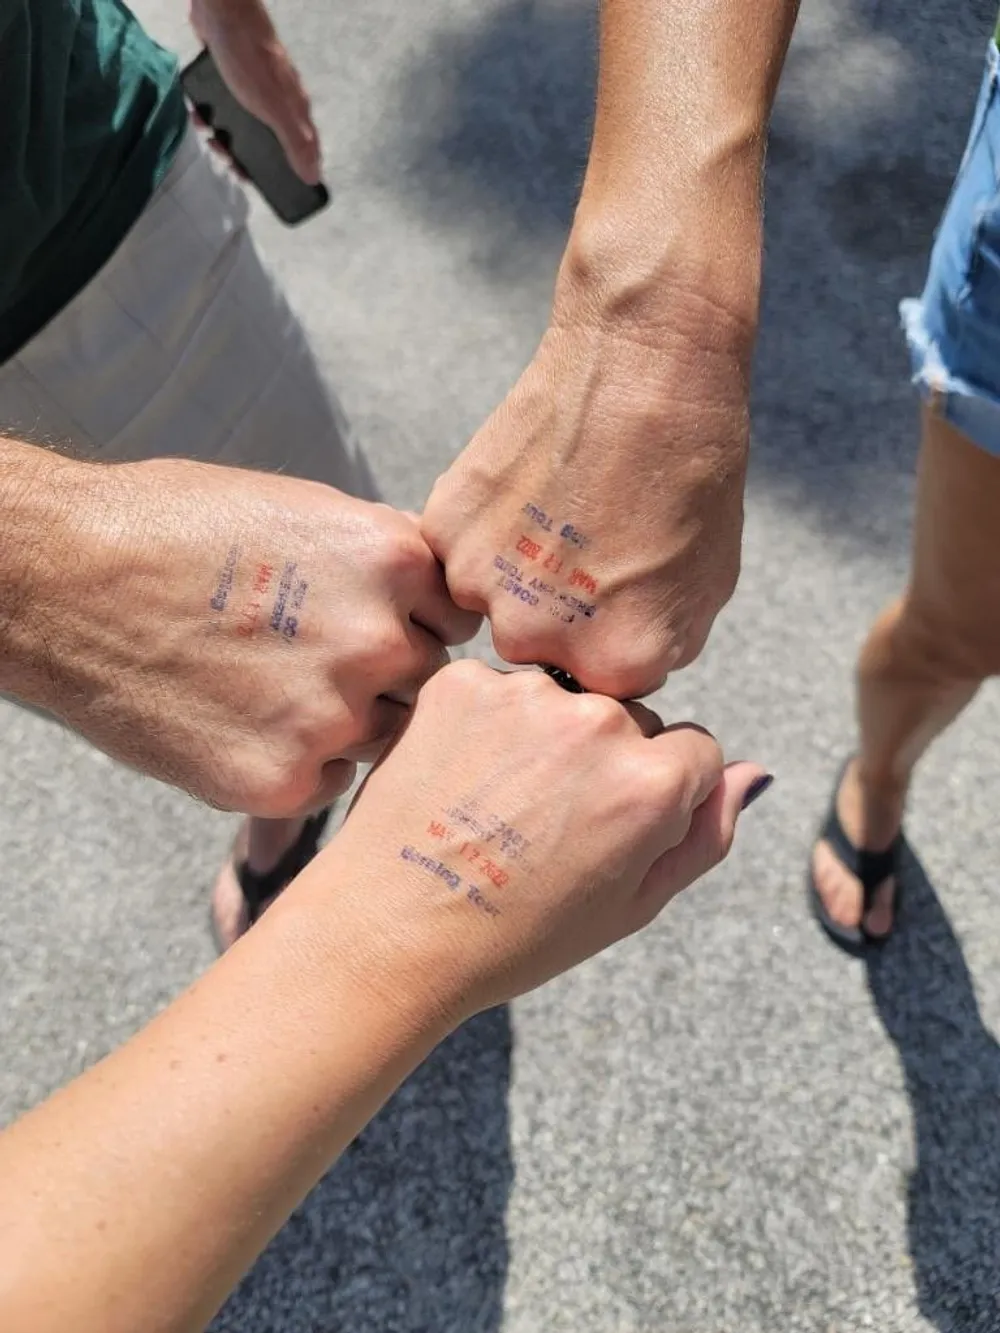 Three people have joined hands with each of their wrists stamped with a purple ink stamp possibly indicating entry to an event or venue